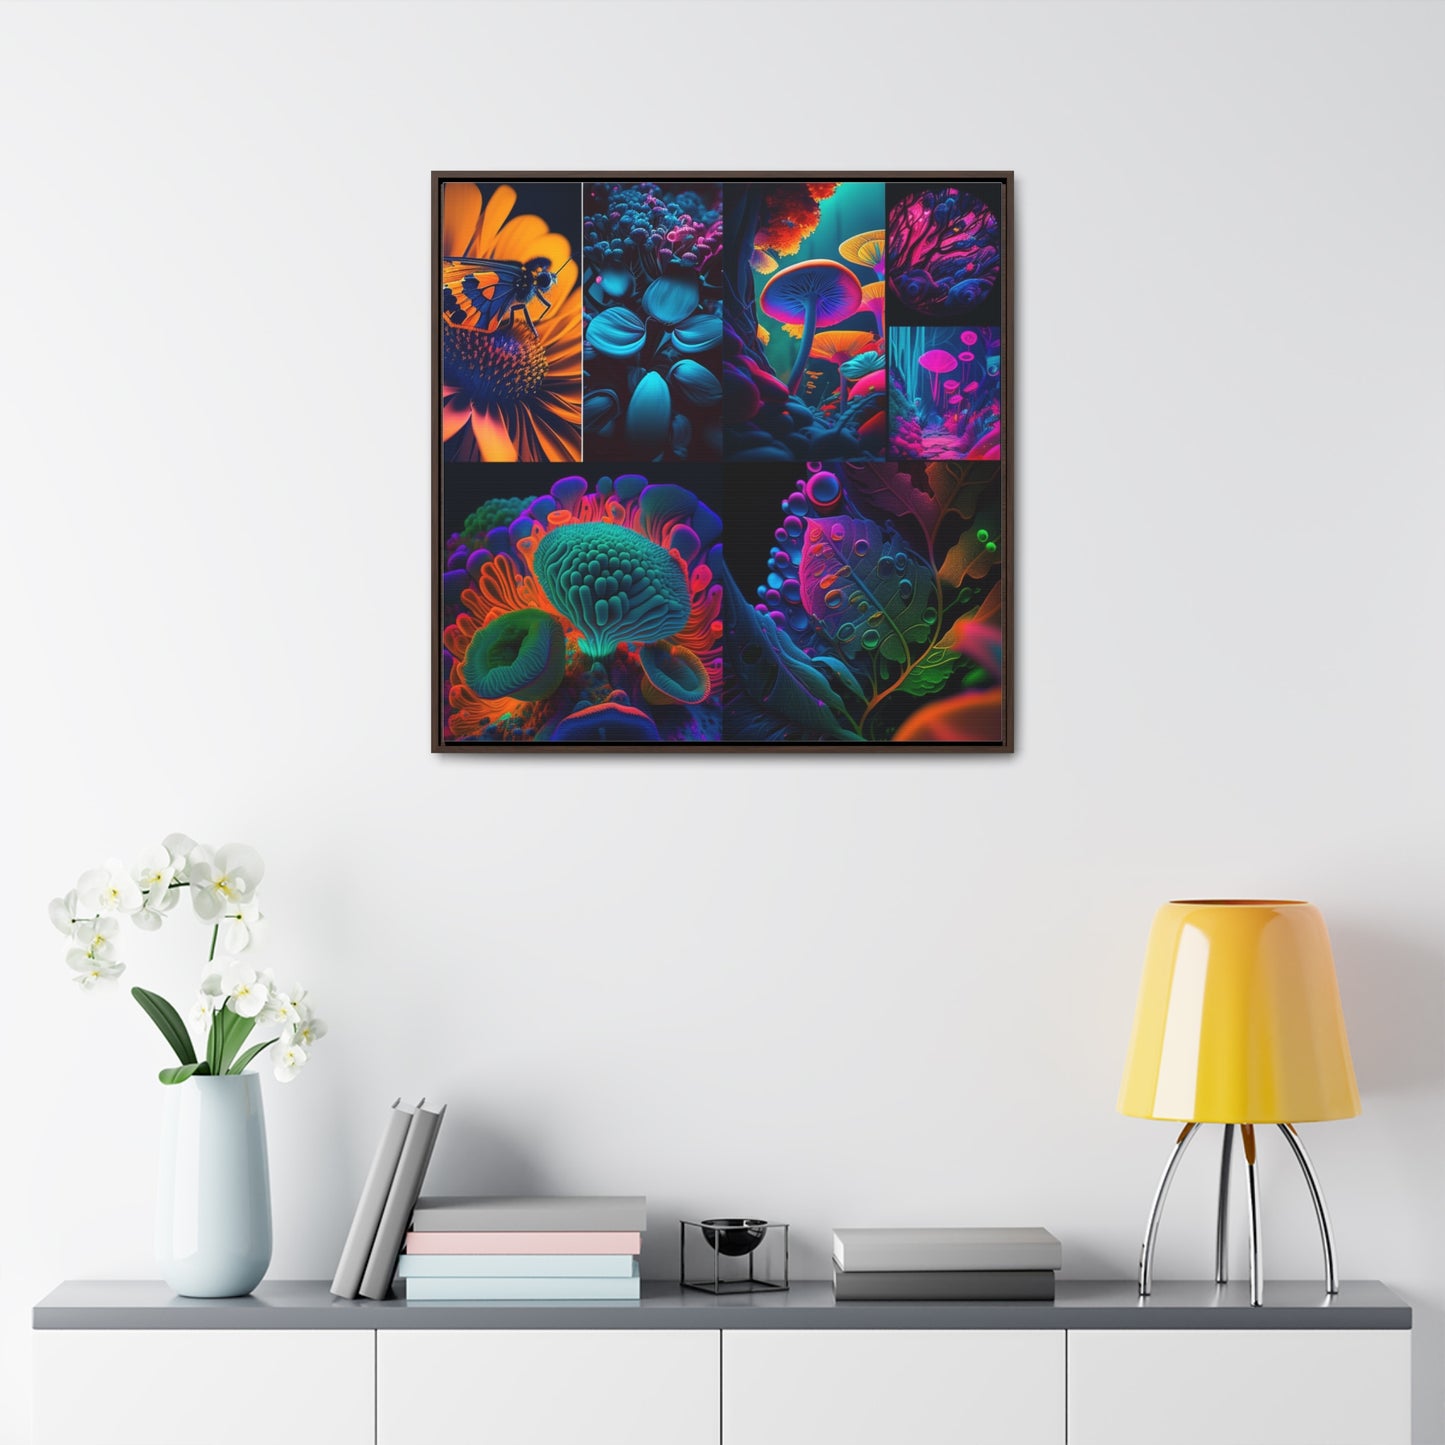 Gallery Canvas Wraps, Square Frame Macro Reef Florescent 5